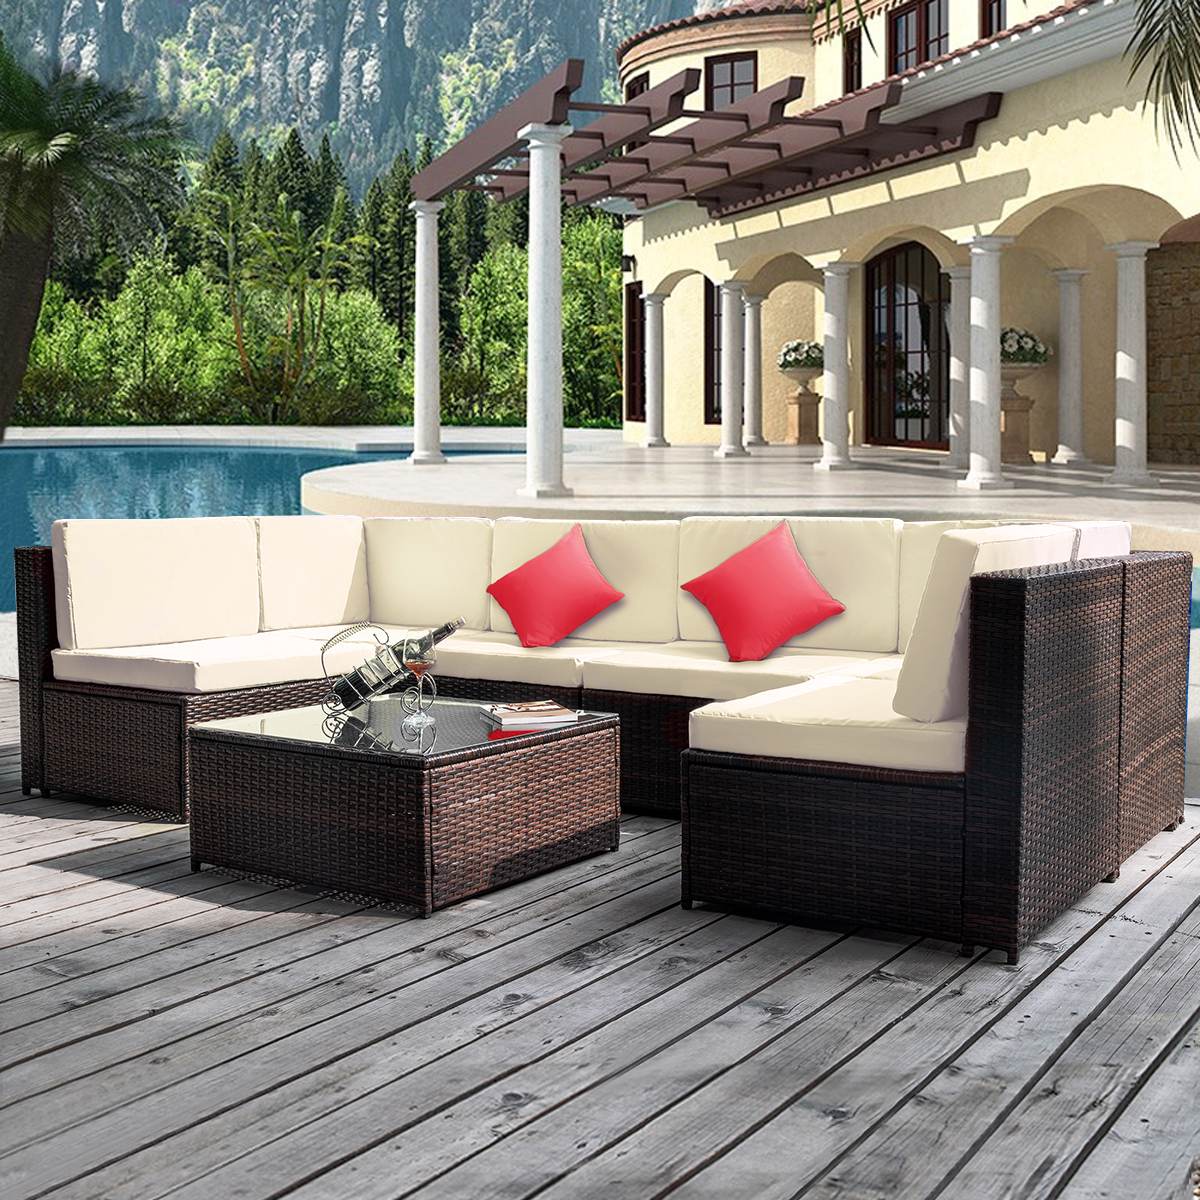 Wicker Patio Furniture Set, 6 Rattan Wicker Chairs with Glass Dining Table, 7 Piece Outdoor Patio Dining Set with Removable Cushions for Backyard, Porch, Garden, Poolside, L2194 - image 2 of 8